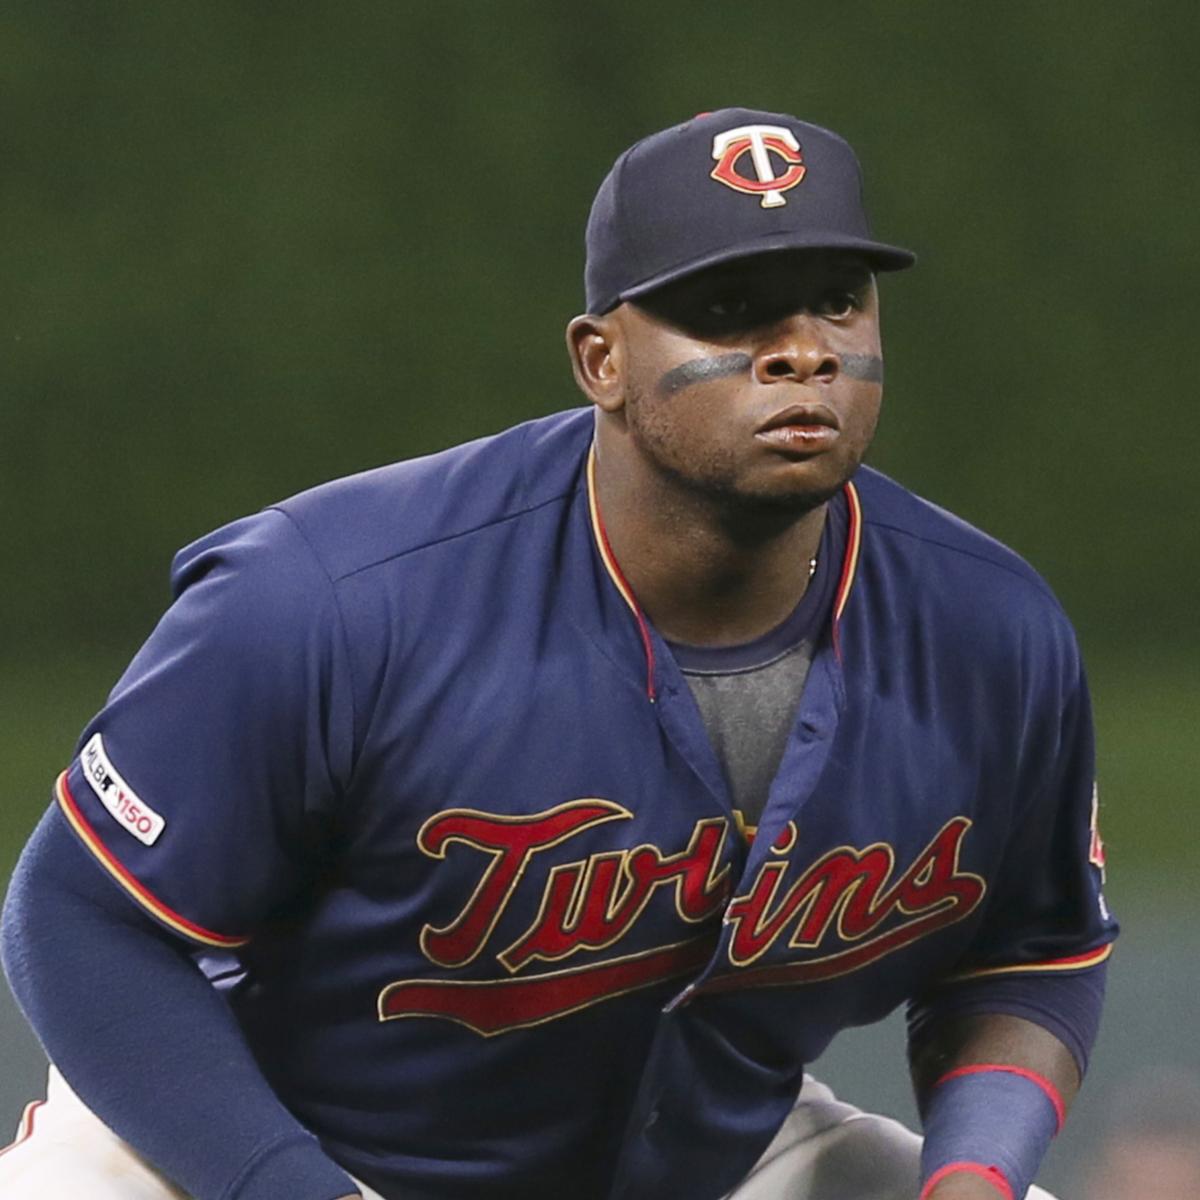 Twins announce it will decline Miguel Sano's option for 2023